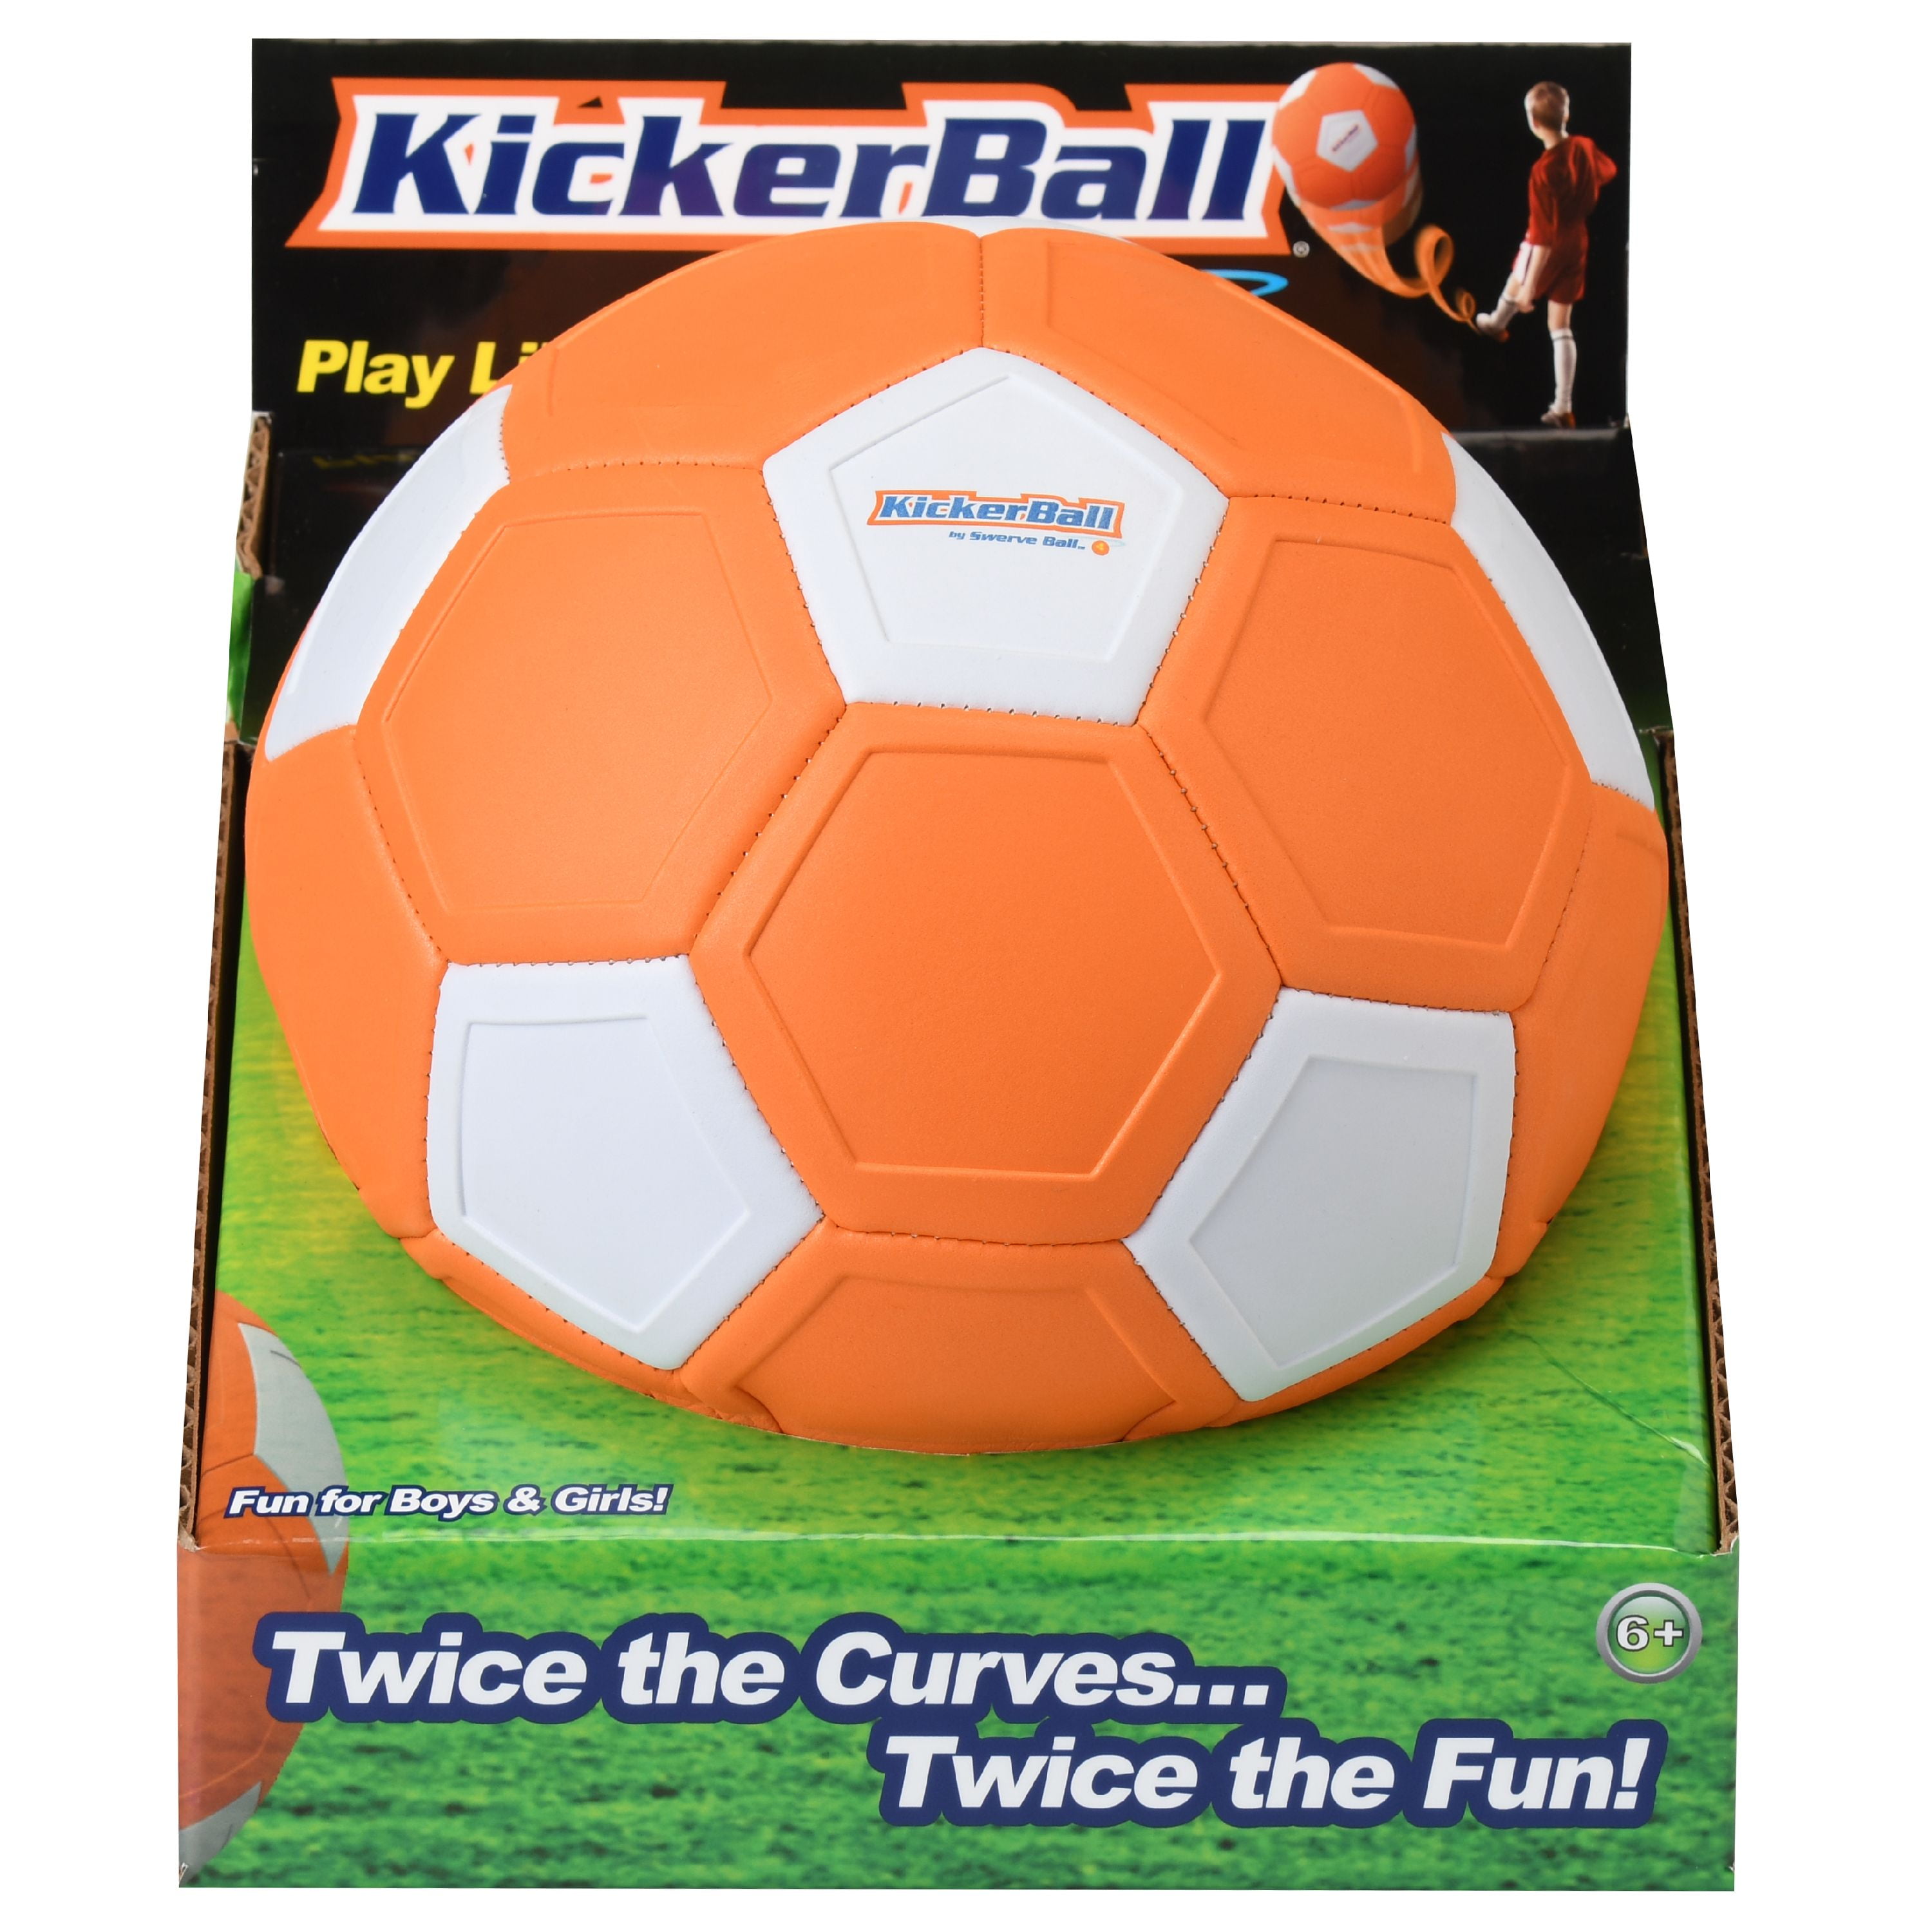 NEW Kickerball By Swerve Ball Kids Children's Play Toys Outdoor Football Bend it 